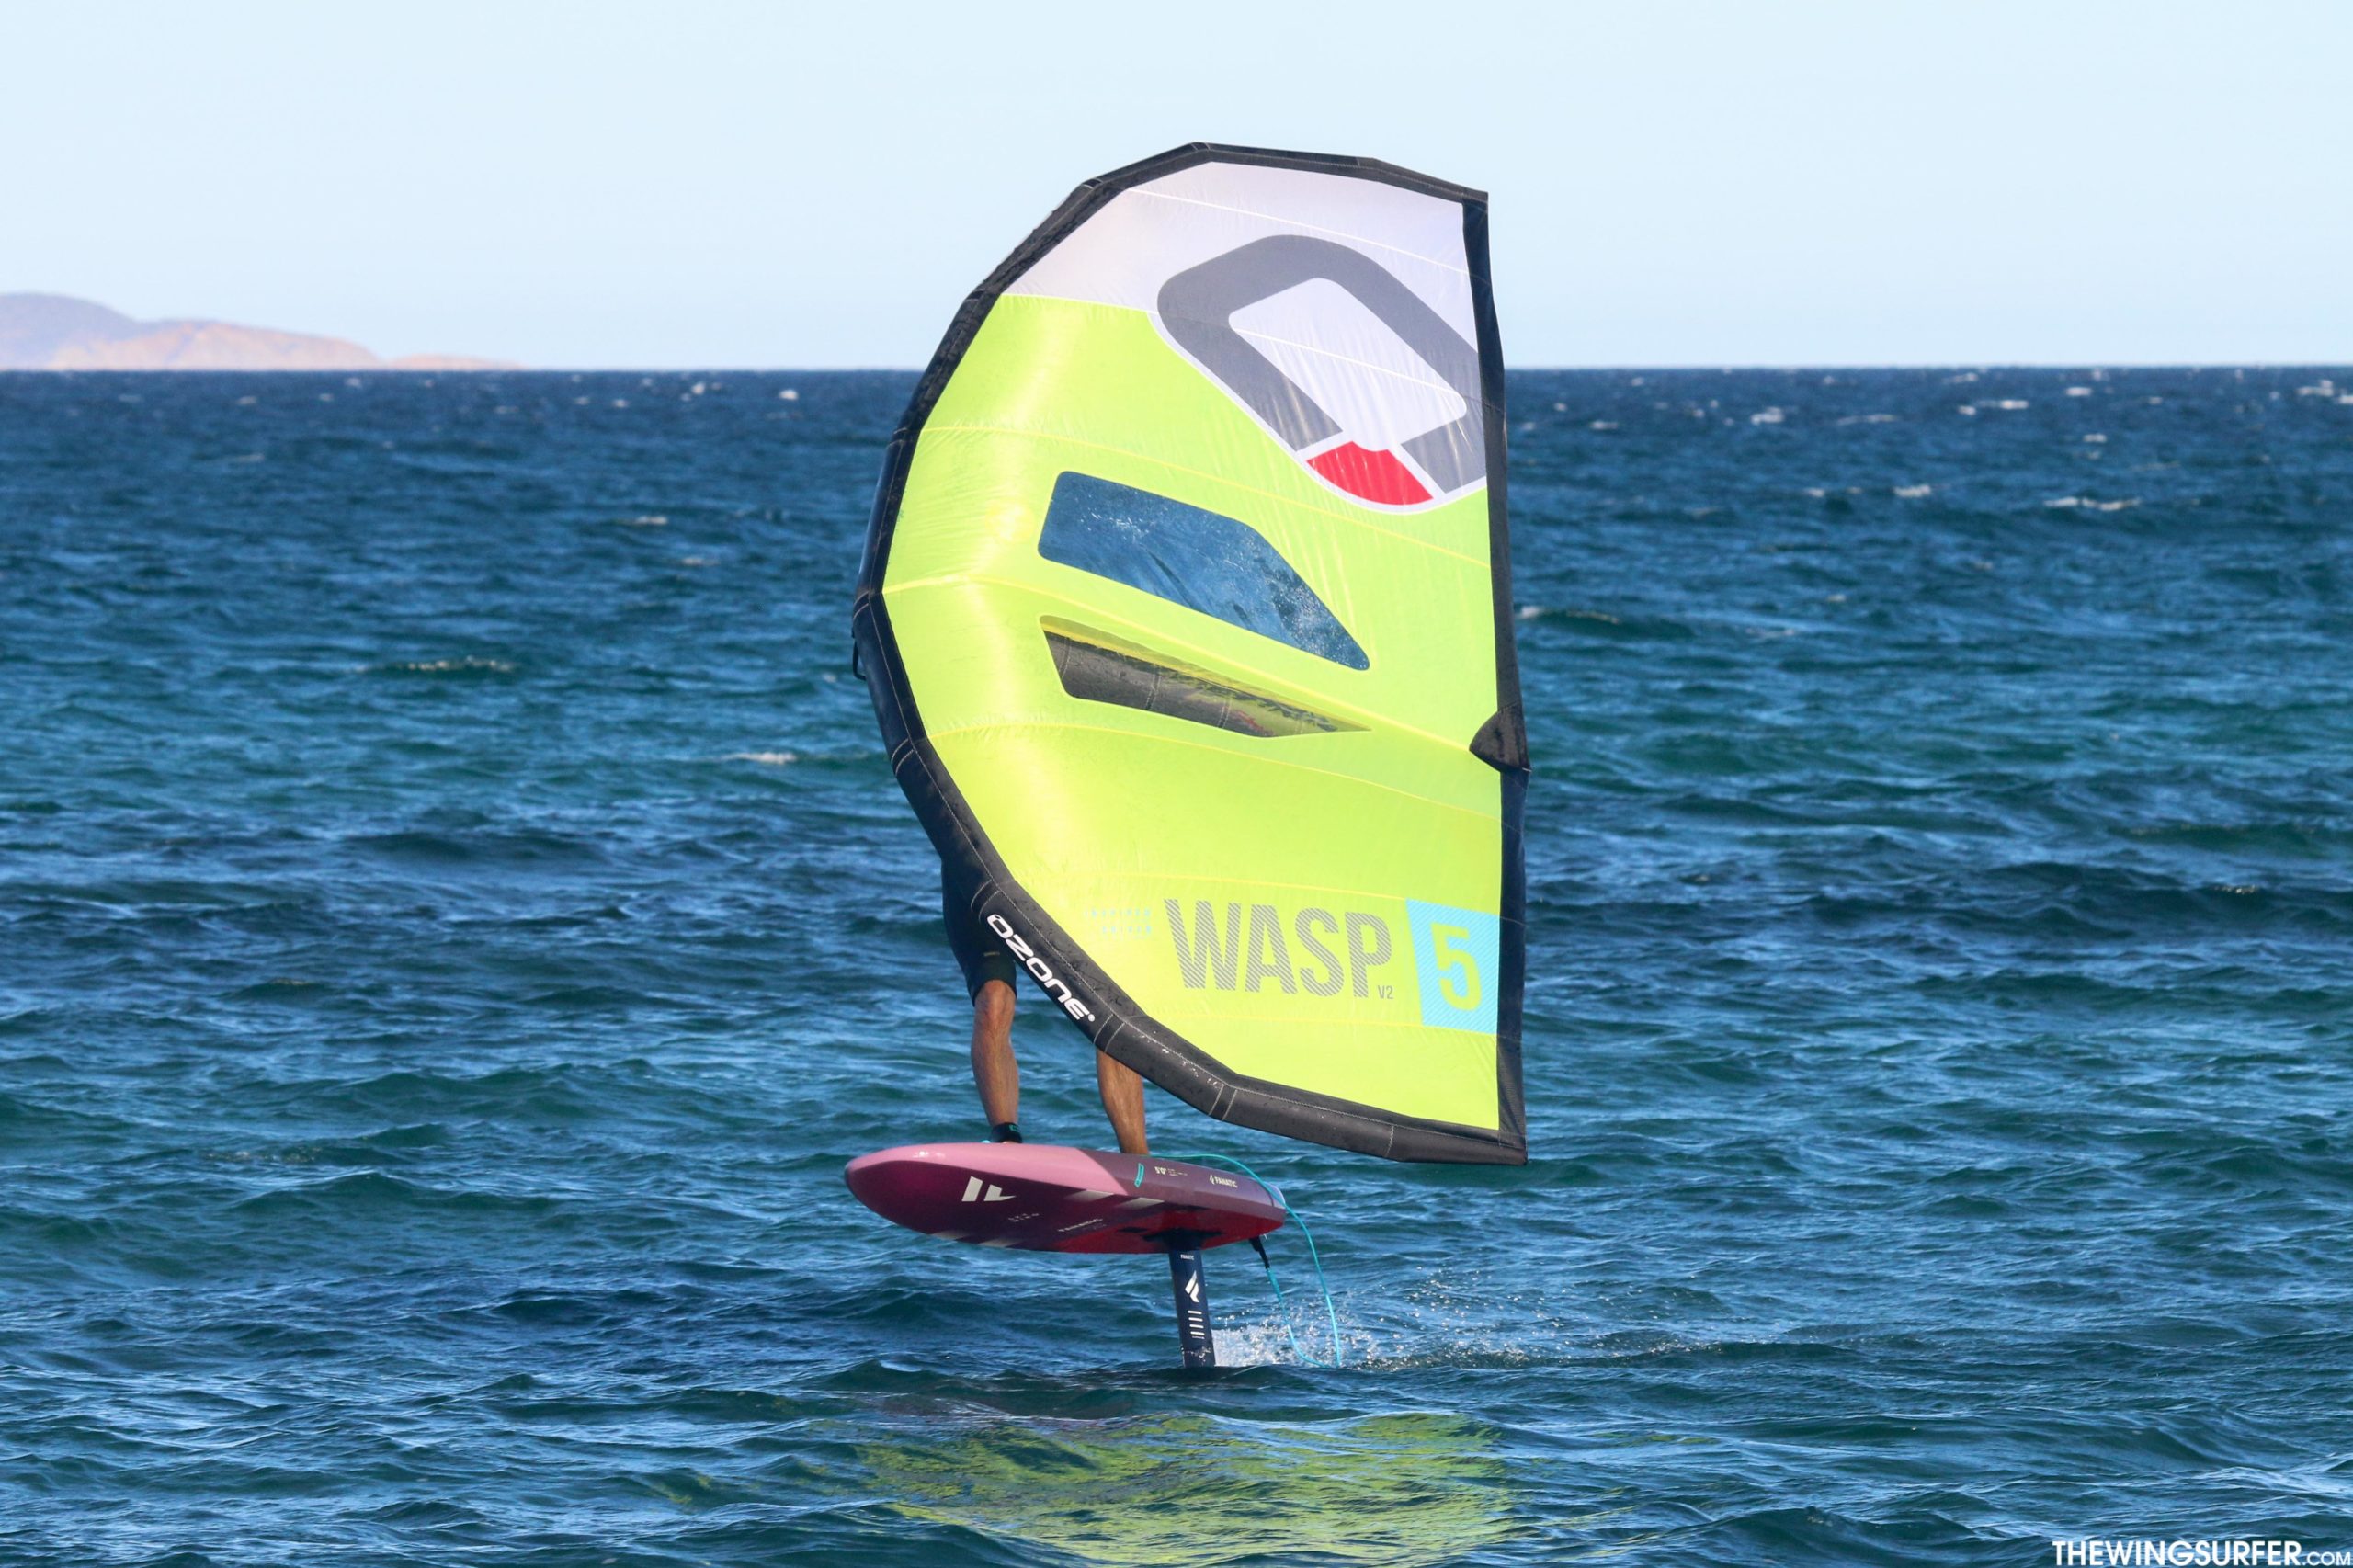 Wing Review: OZONE Wasp V2 - The Wingsurfer Magazine